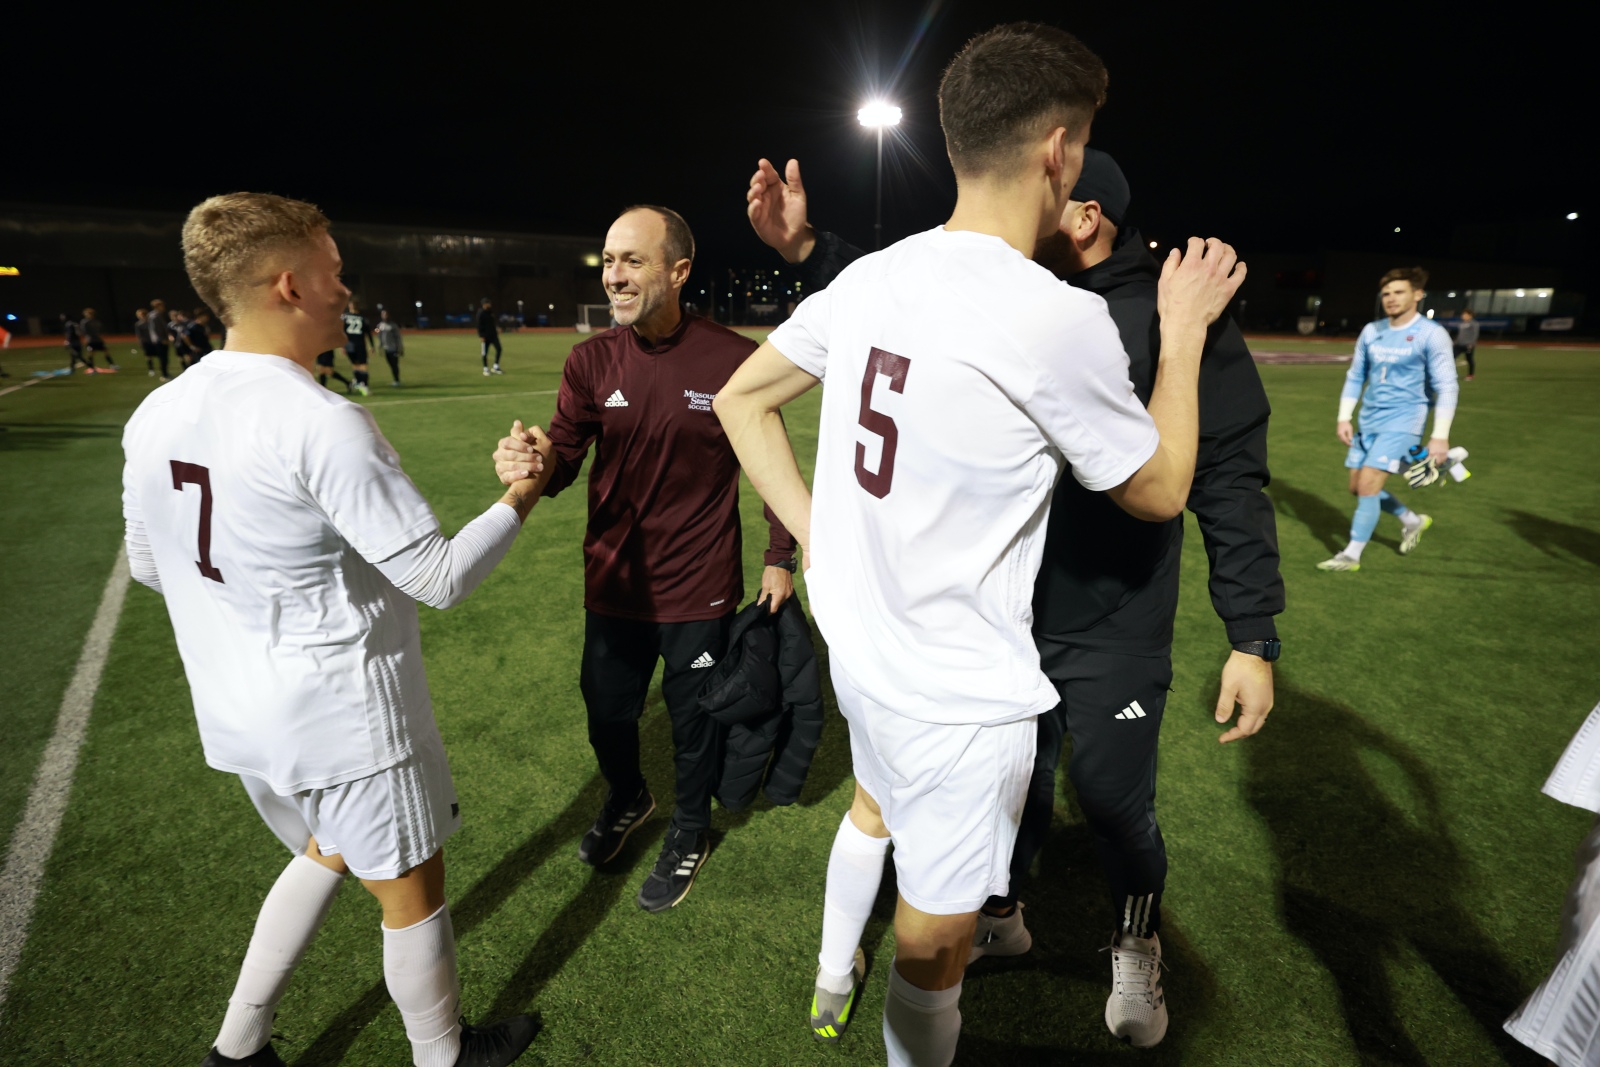 Missouri State men's soccer coach Michael Seabolt celebrates with his players after a win